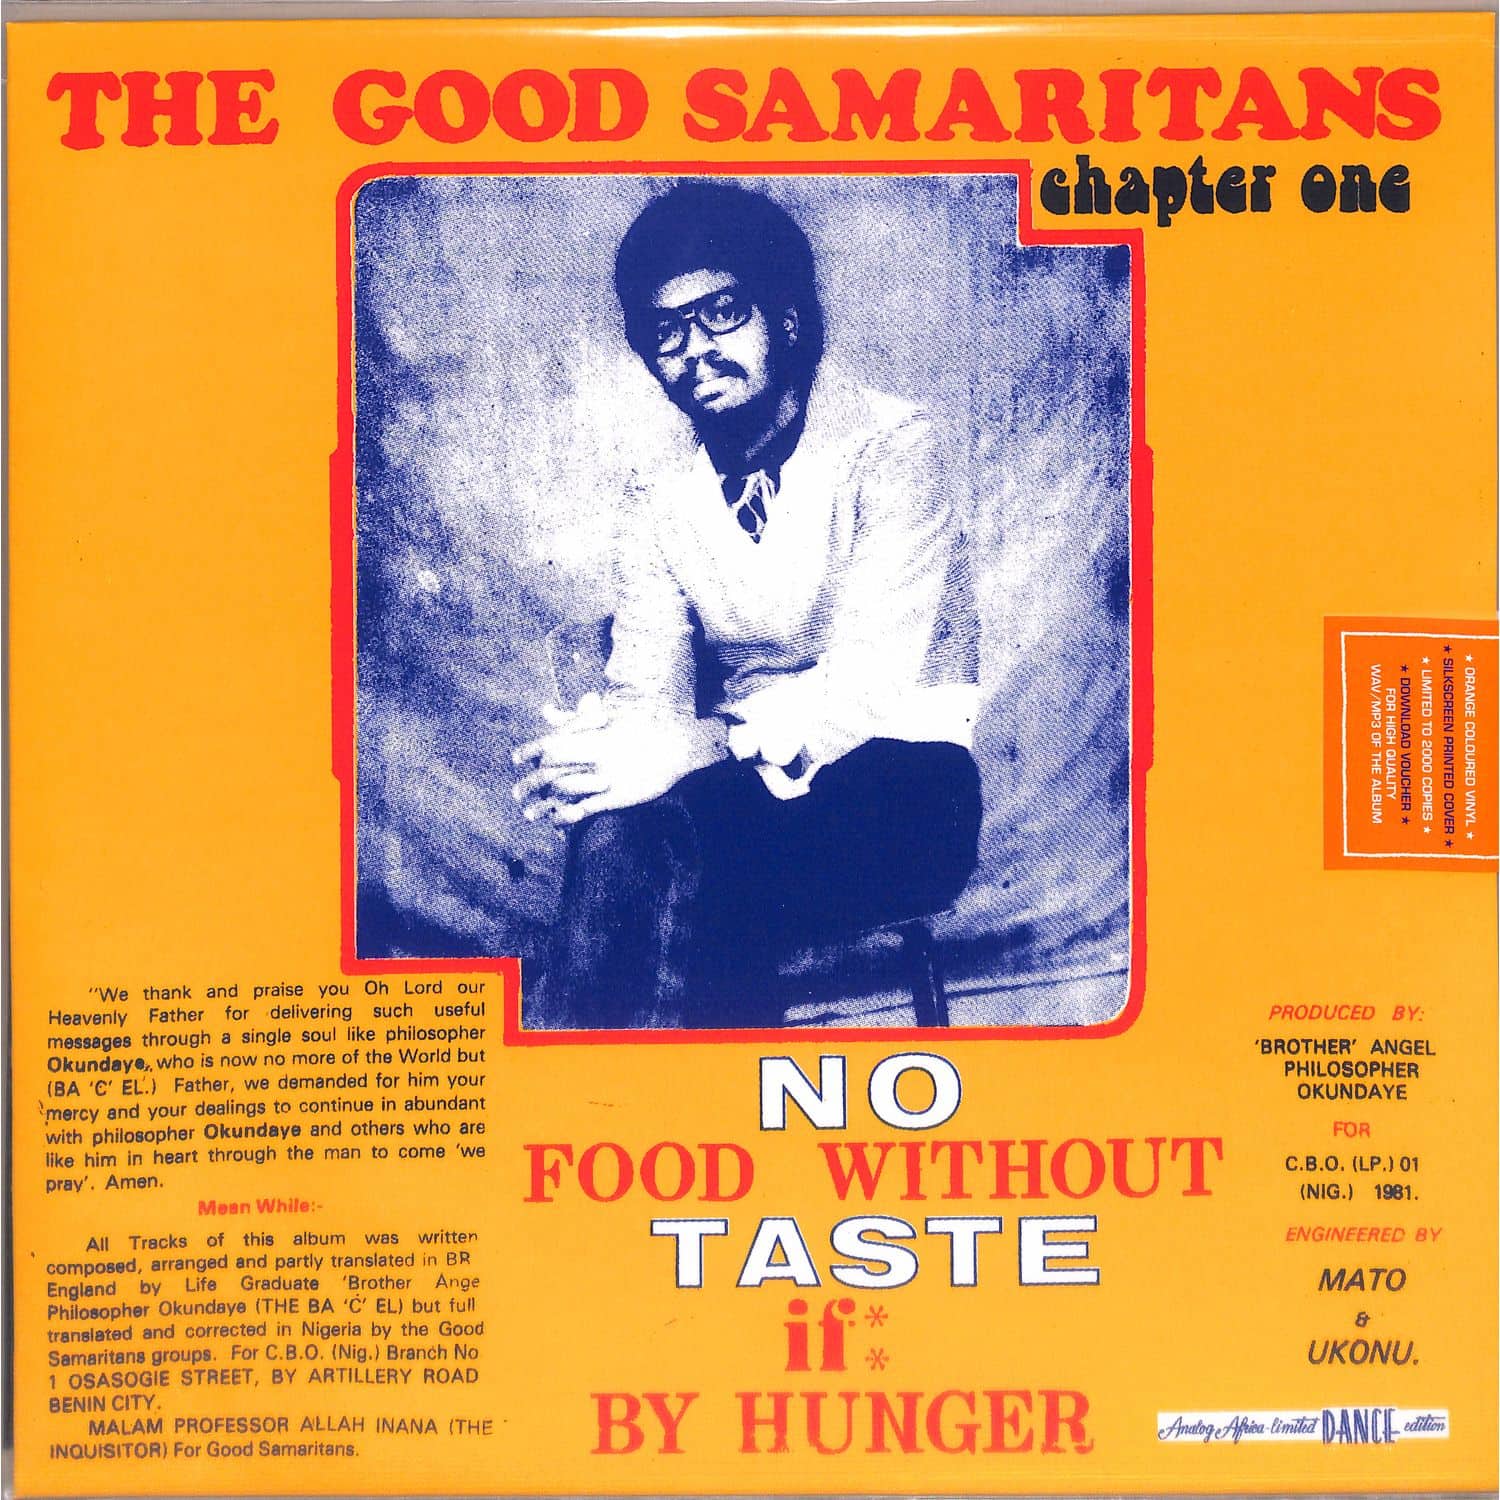 The Good Samaritans - NO FOOD WITHOUT TASTE IF BY HUNGER 